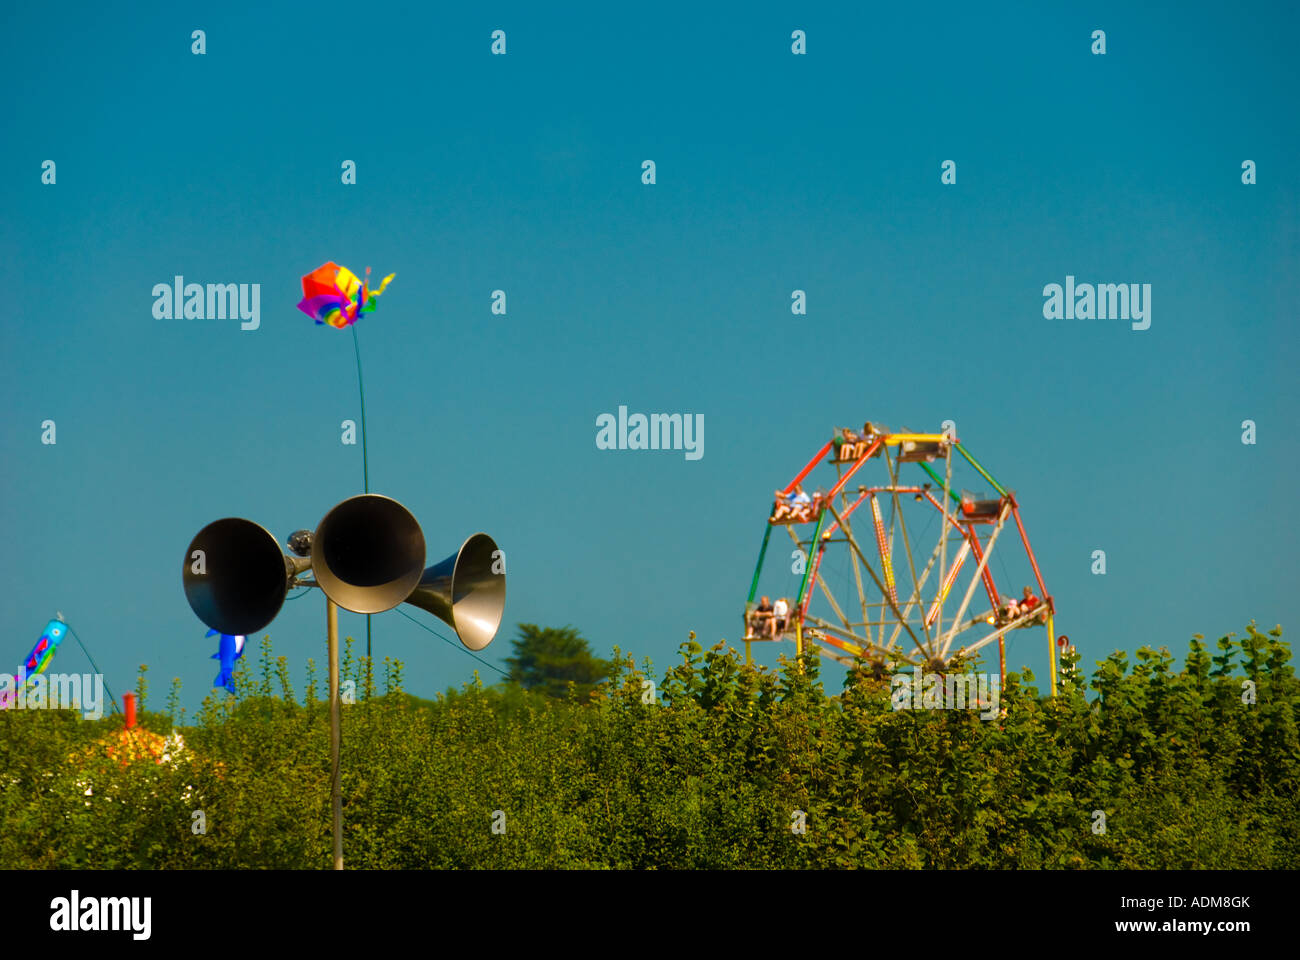 Public Address speakers at a Country Fair with a Ferris Wheel in the Background Stock Photo